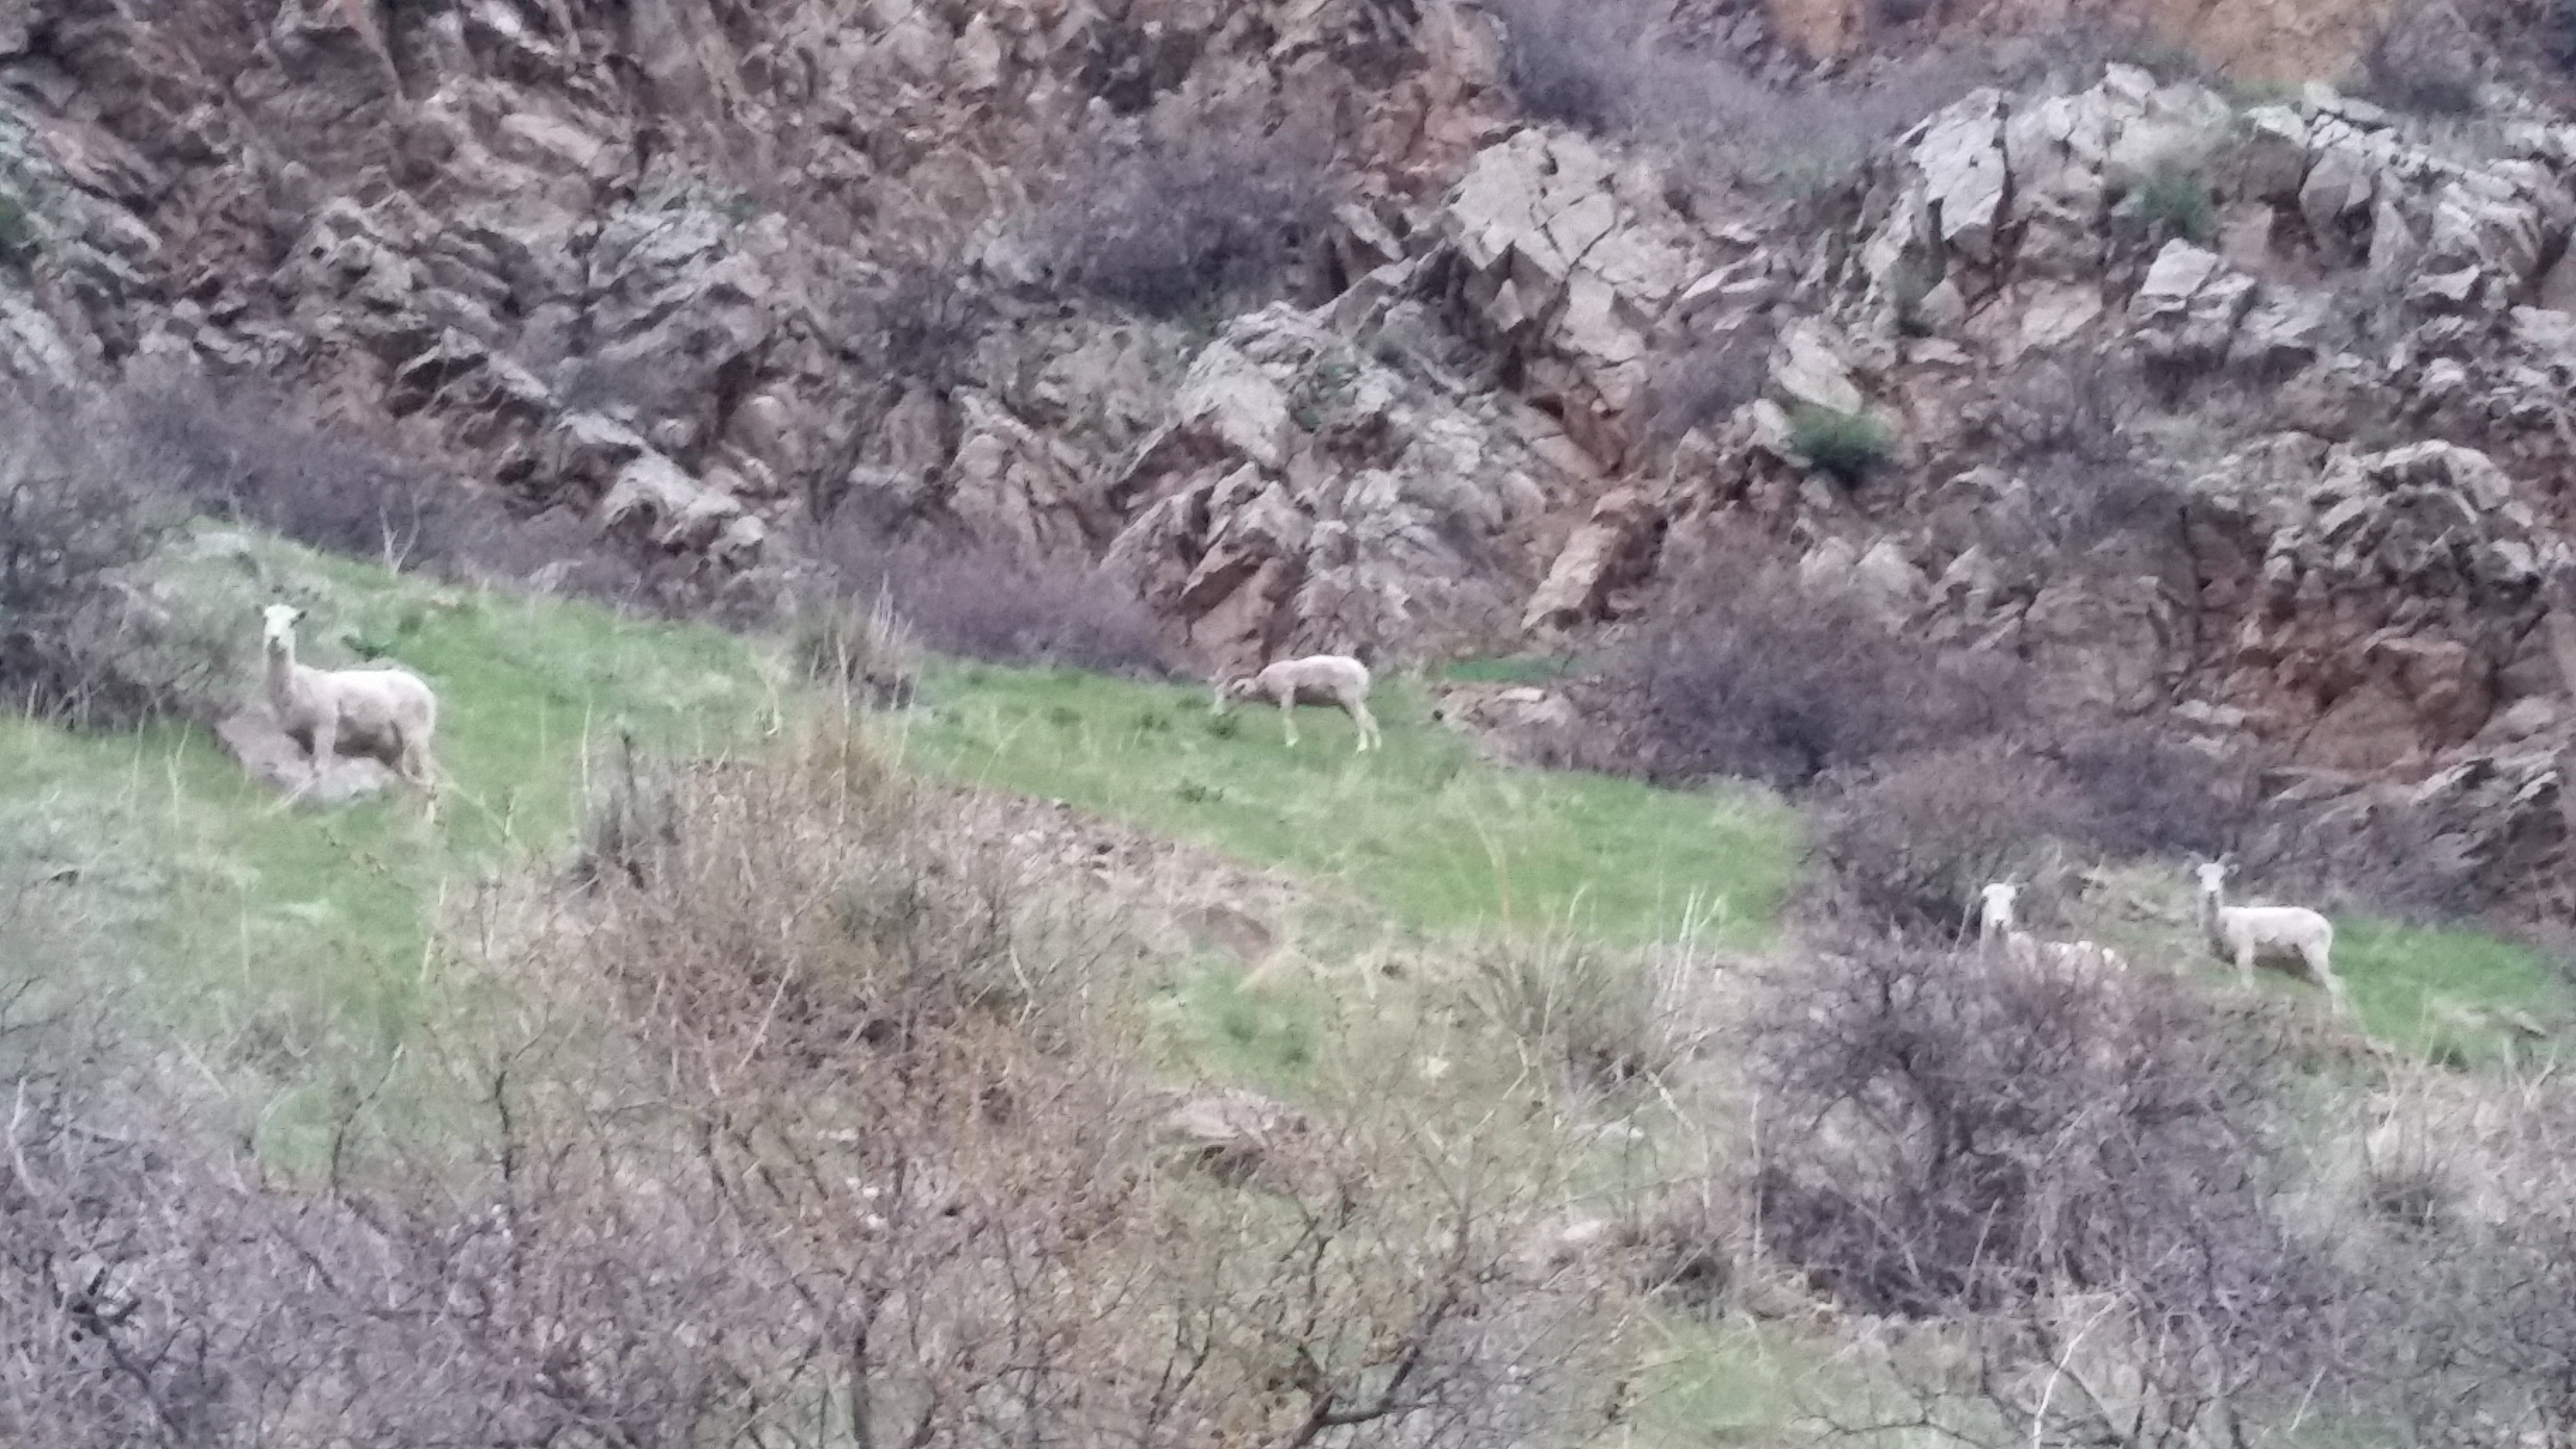 Big horn sheep just outside of the campground